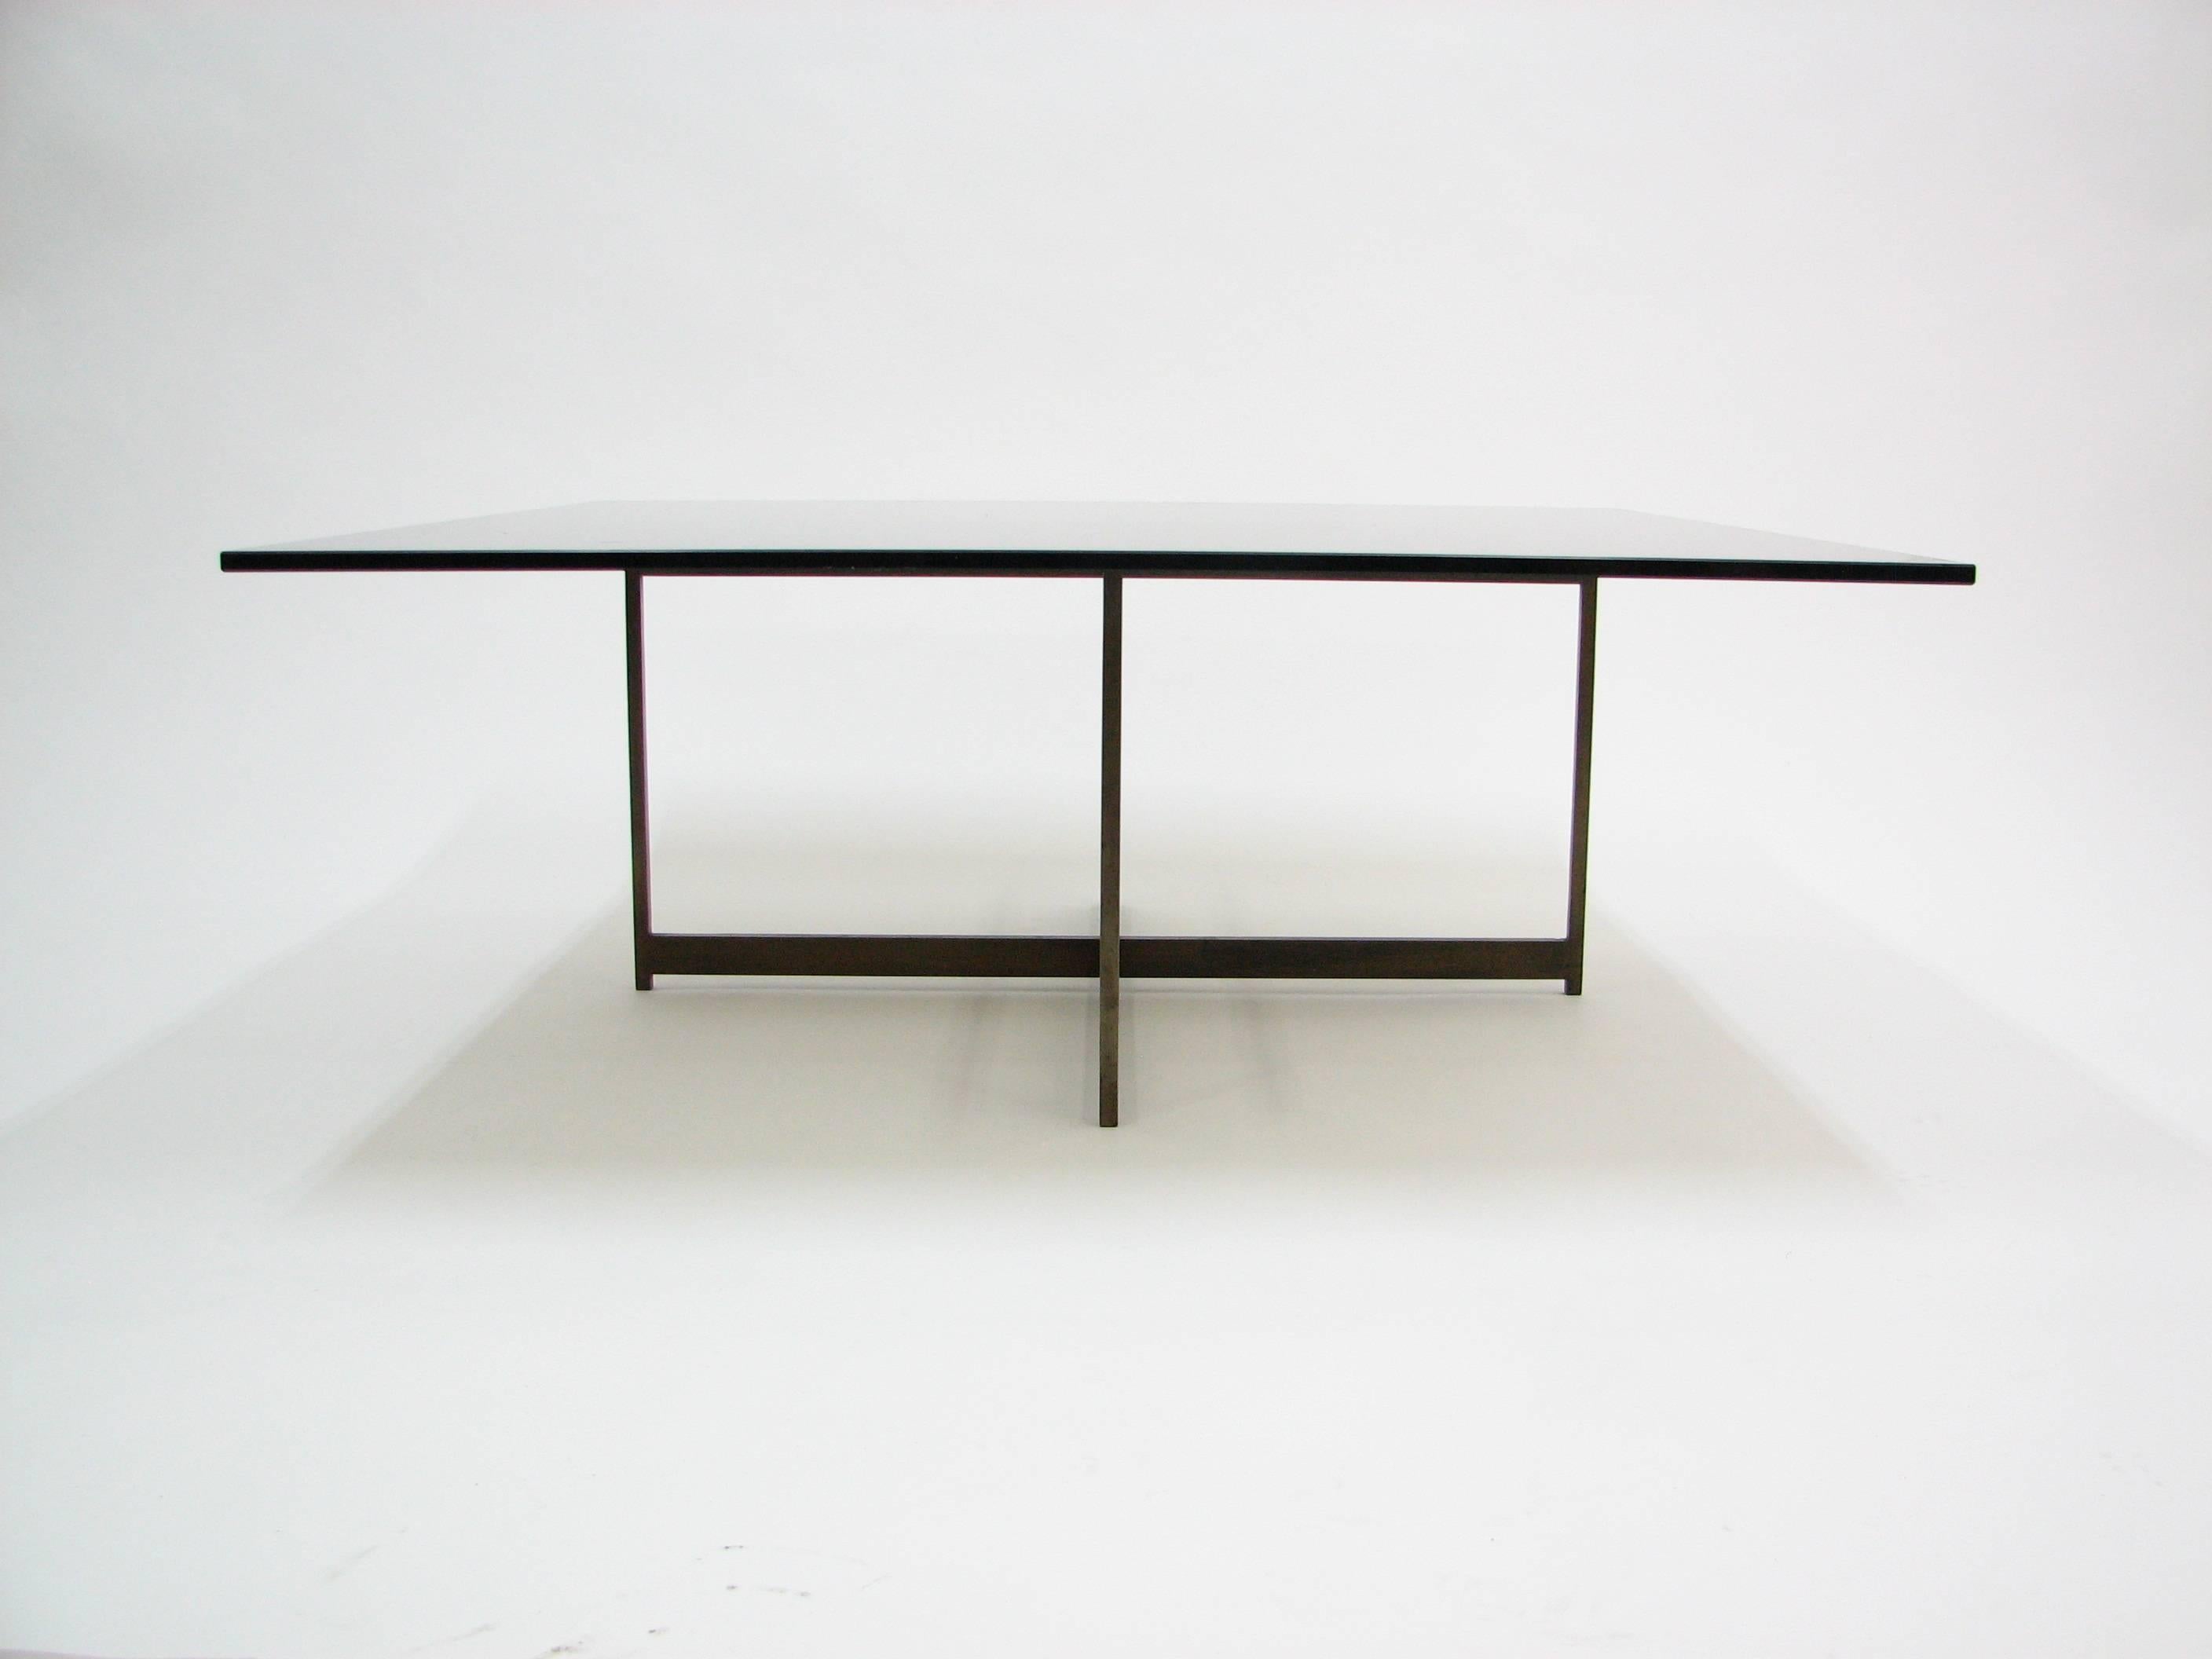 A beautiful Mid-Century smoked glass and bronze x-base coffee table in the manner of Milo Baughman. The weight of the base ensures stability and lack of movement. The glass has a flat polished edge and is 3/4